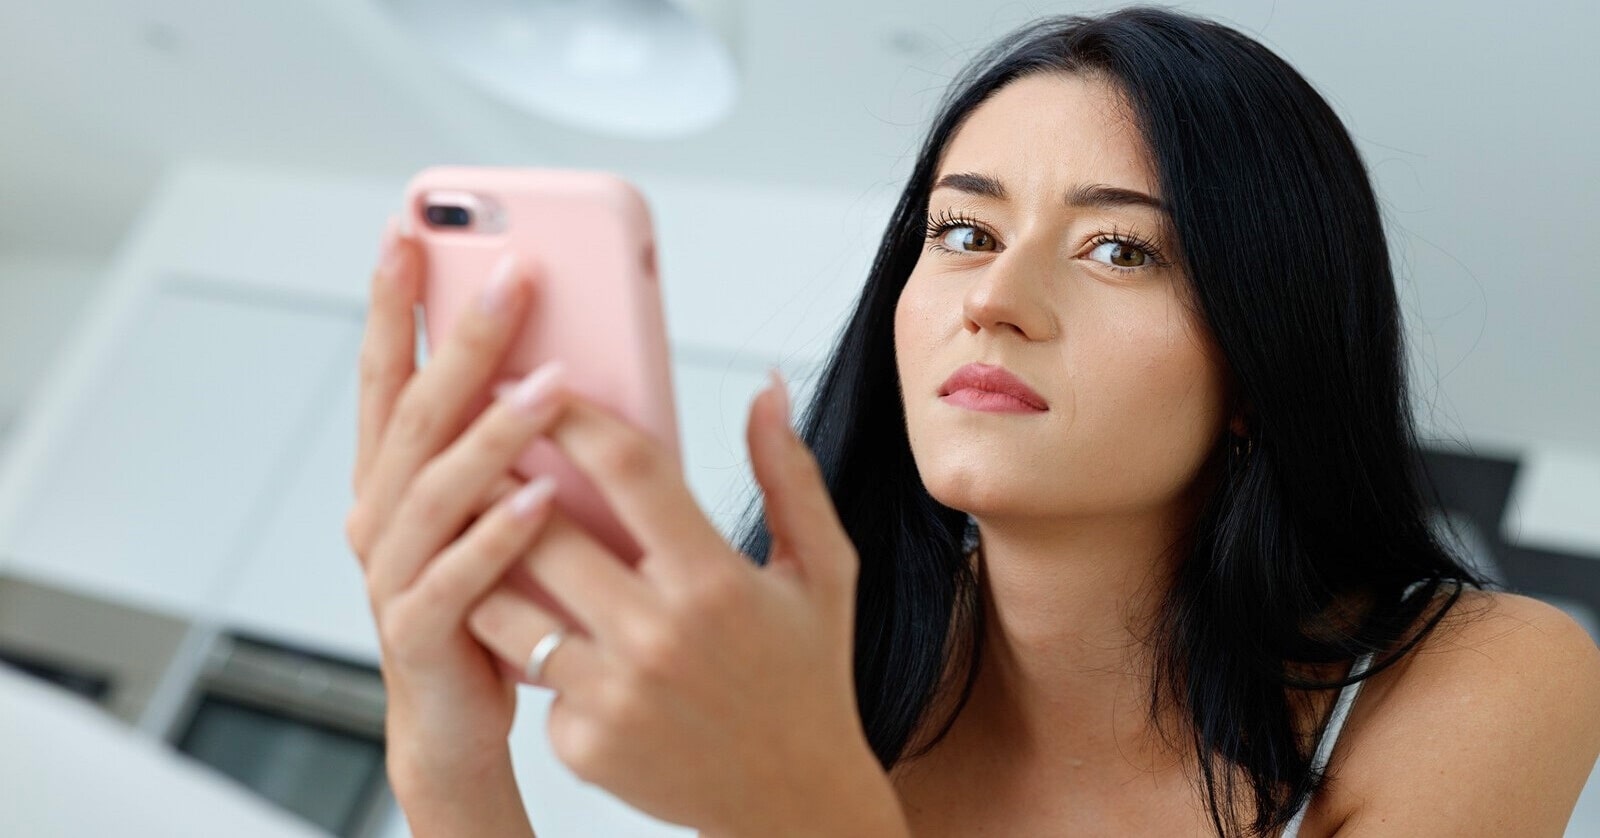 young woman texting a good excuse to get out of something